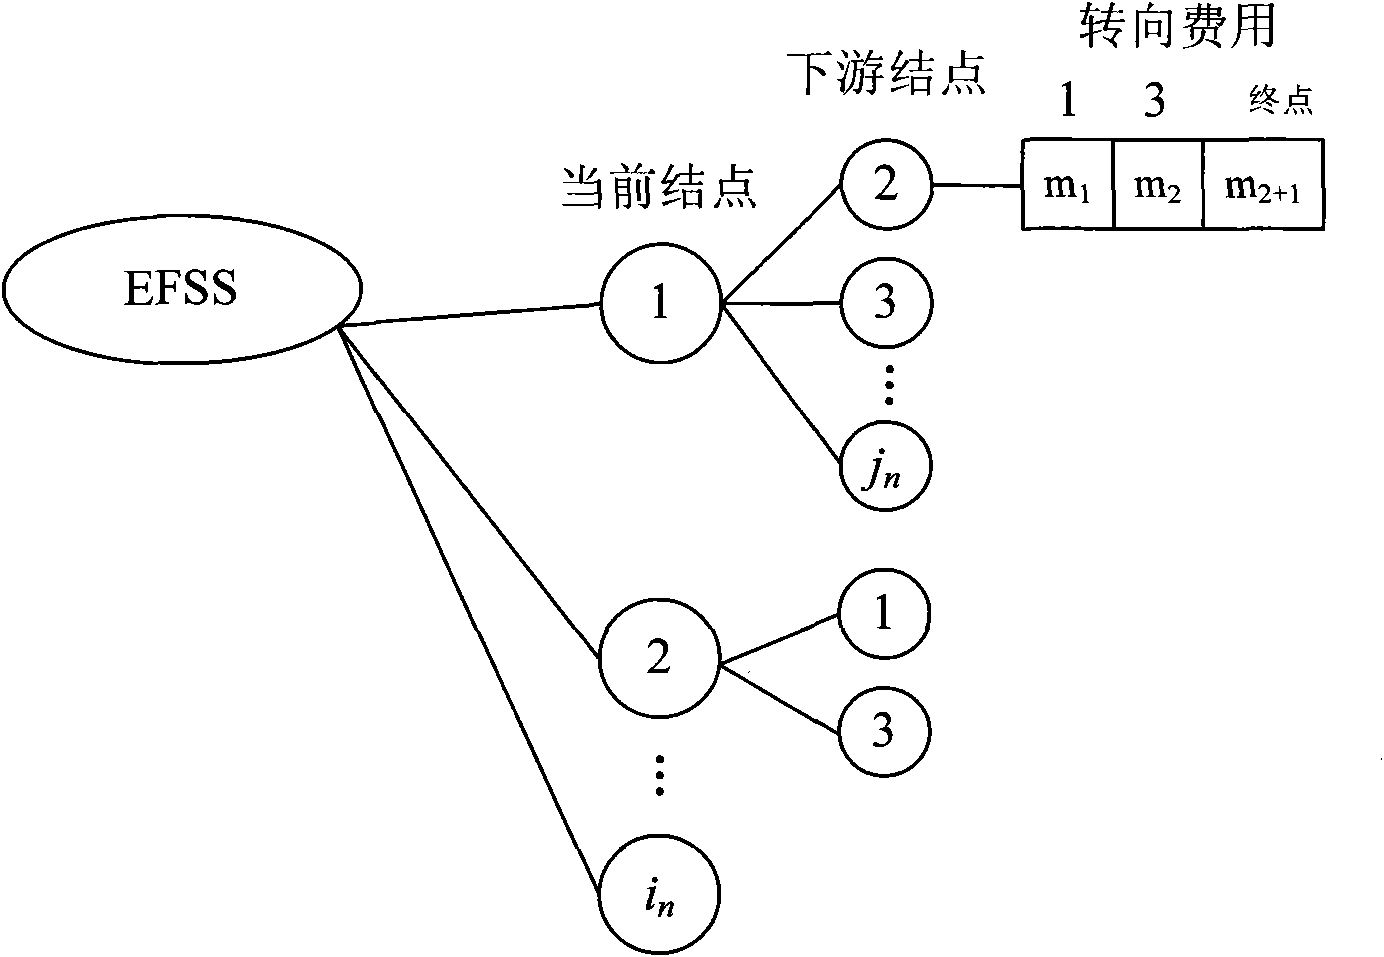 Shortest path labeling algorithm considering intersection turning